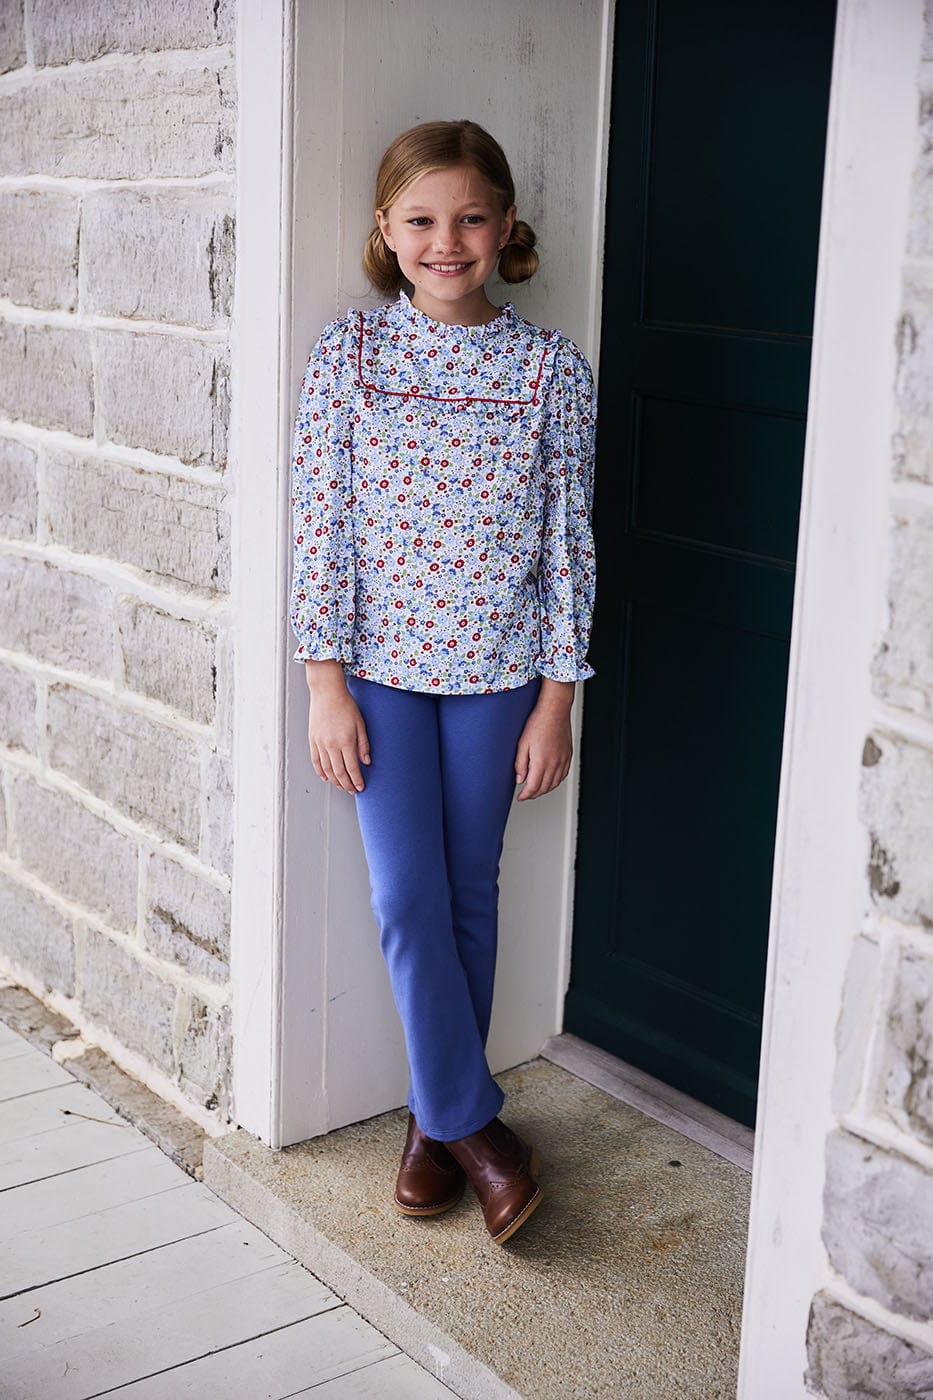 classic childrens clothing girls blouse in blue and red floral pattern with ruffles around neck and sleeves and red piping detailing